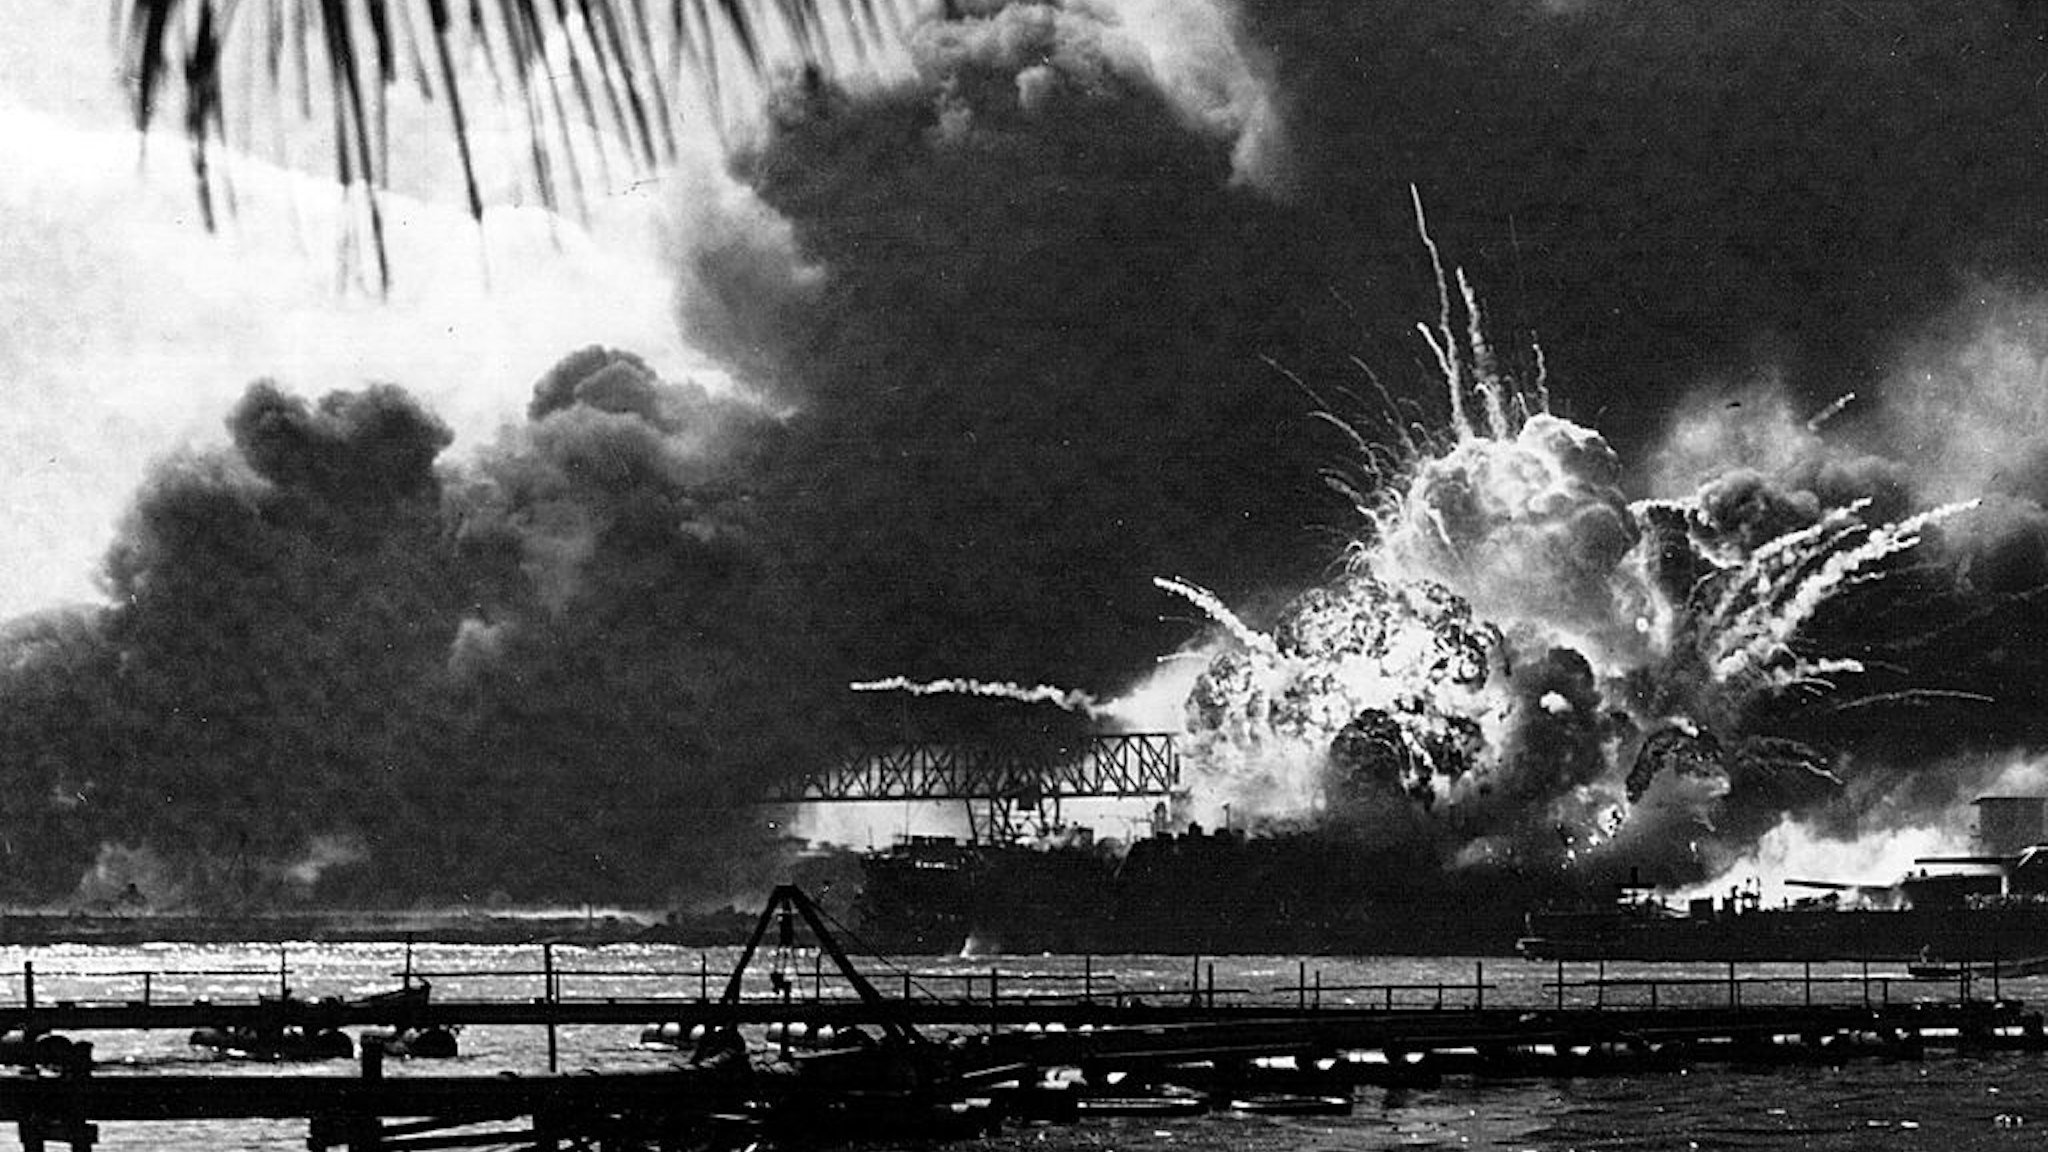 The USS Shaw explodes during the Japanese raid on Pearl Harbor December 7, 1941.